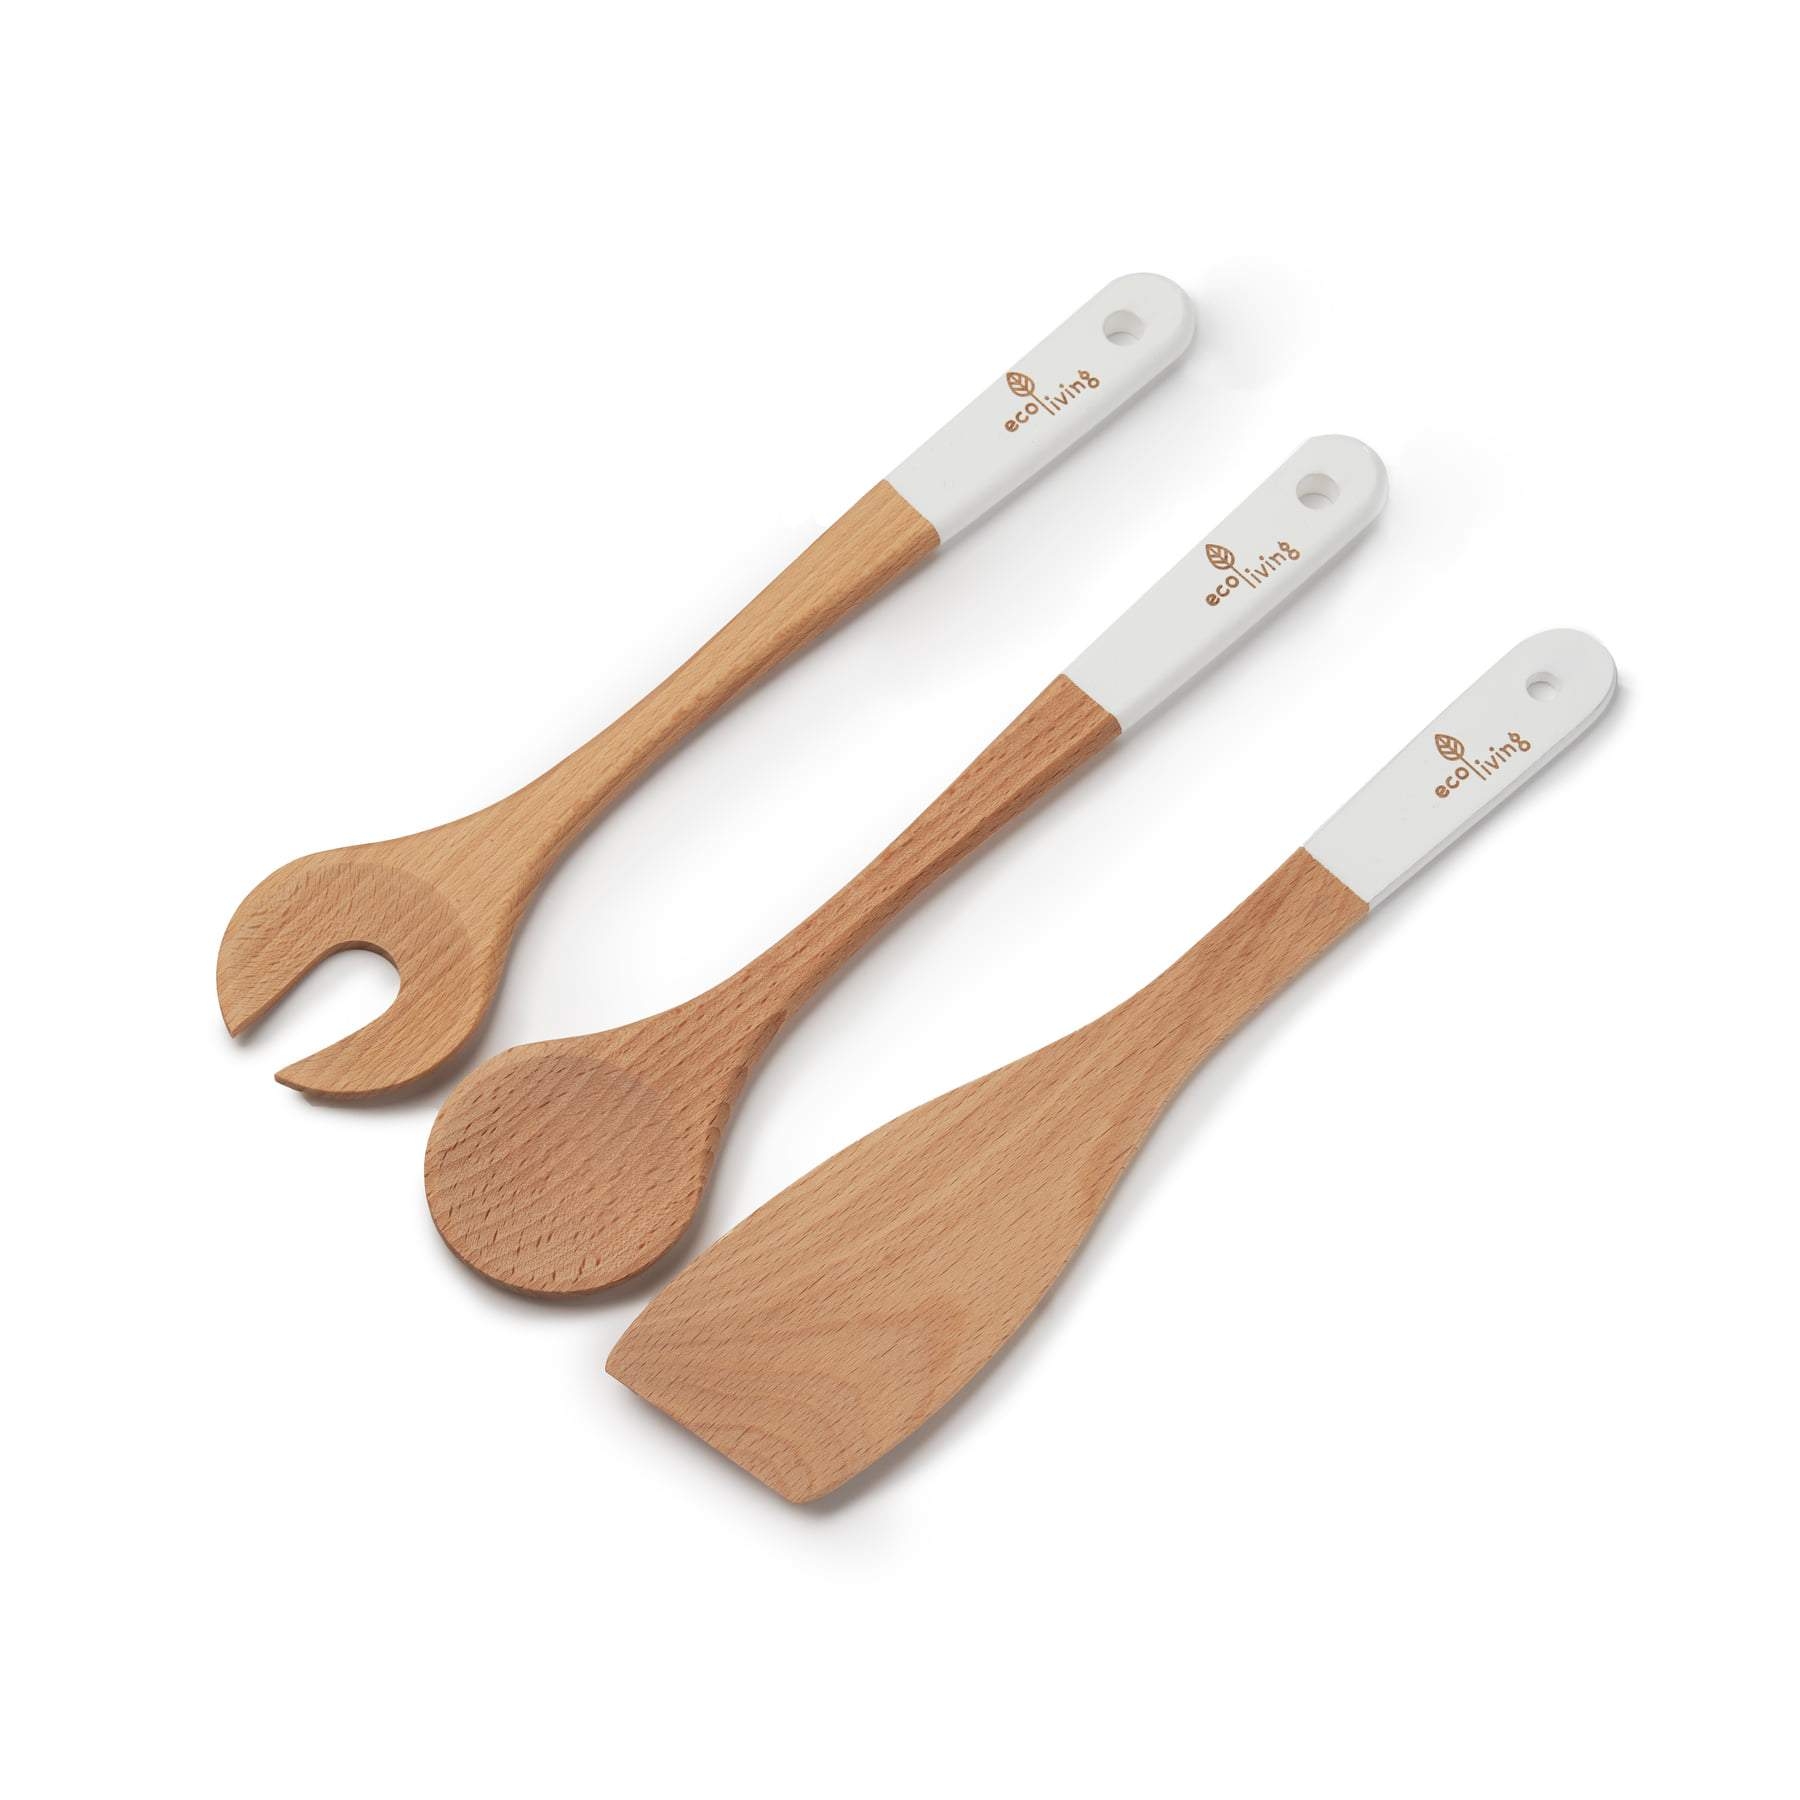 Plastic Free Kitchen Servers Set – By EcoLiving